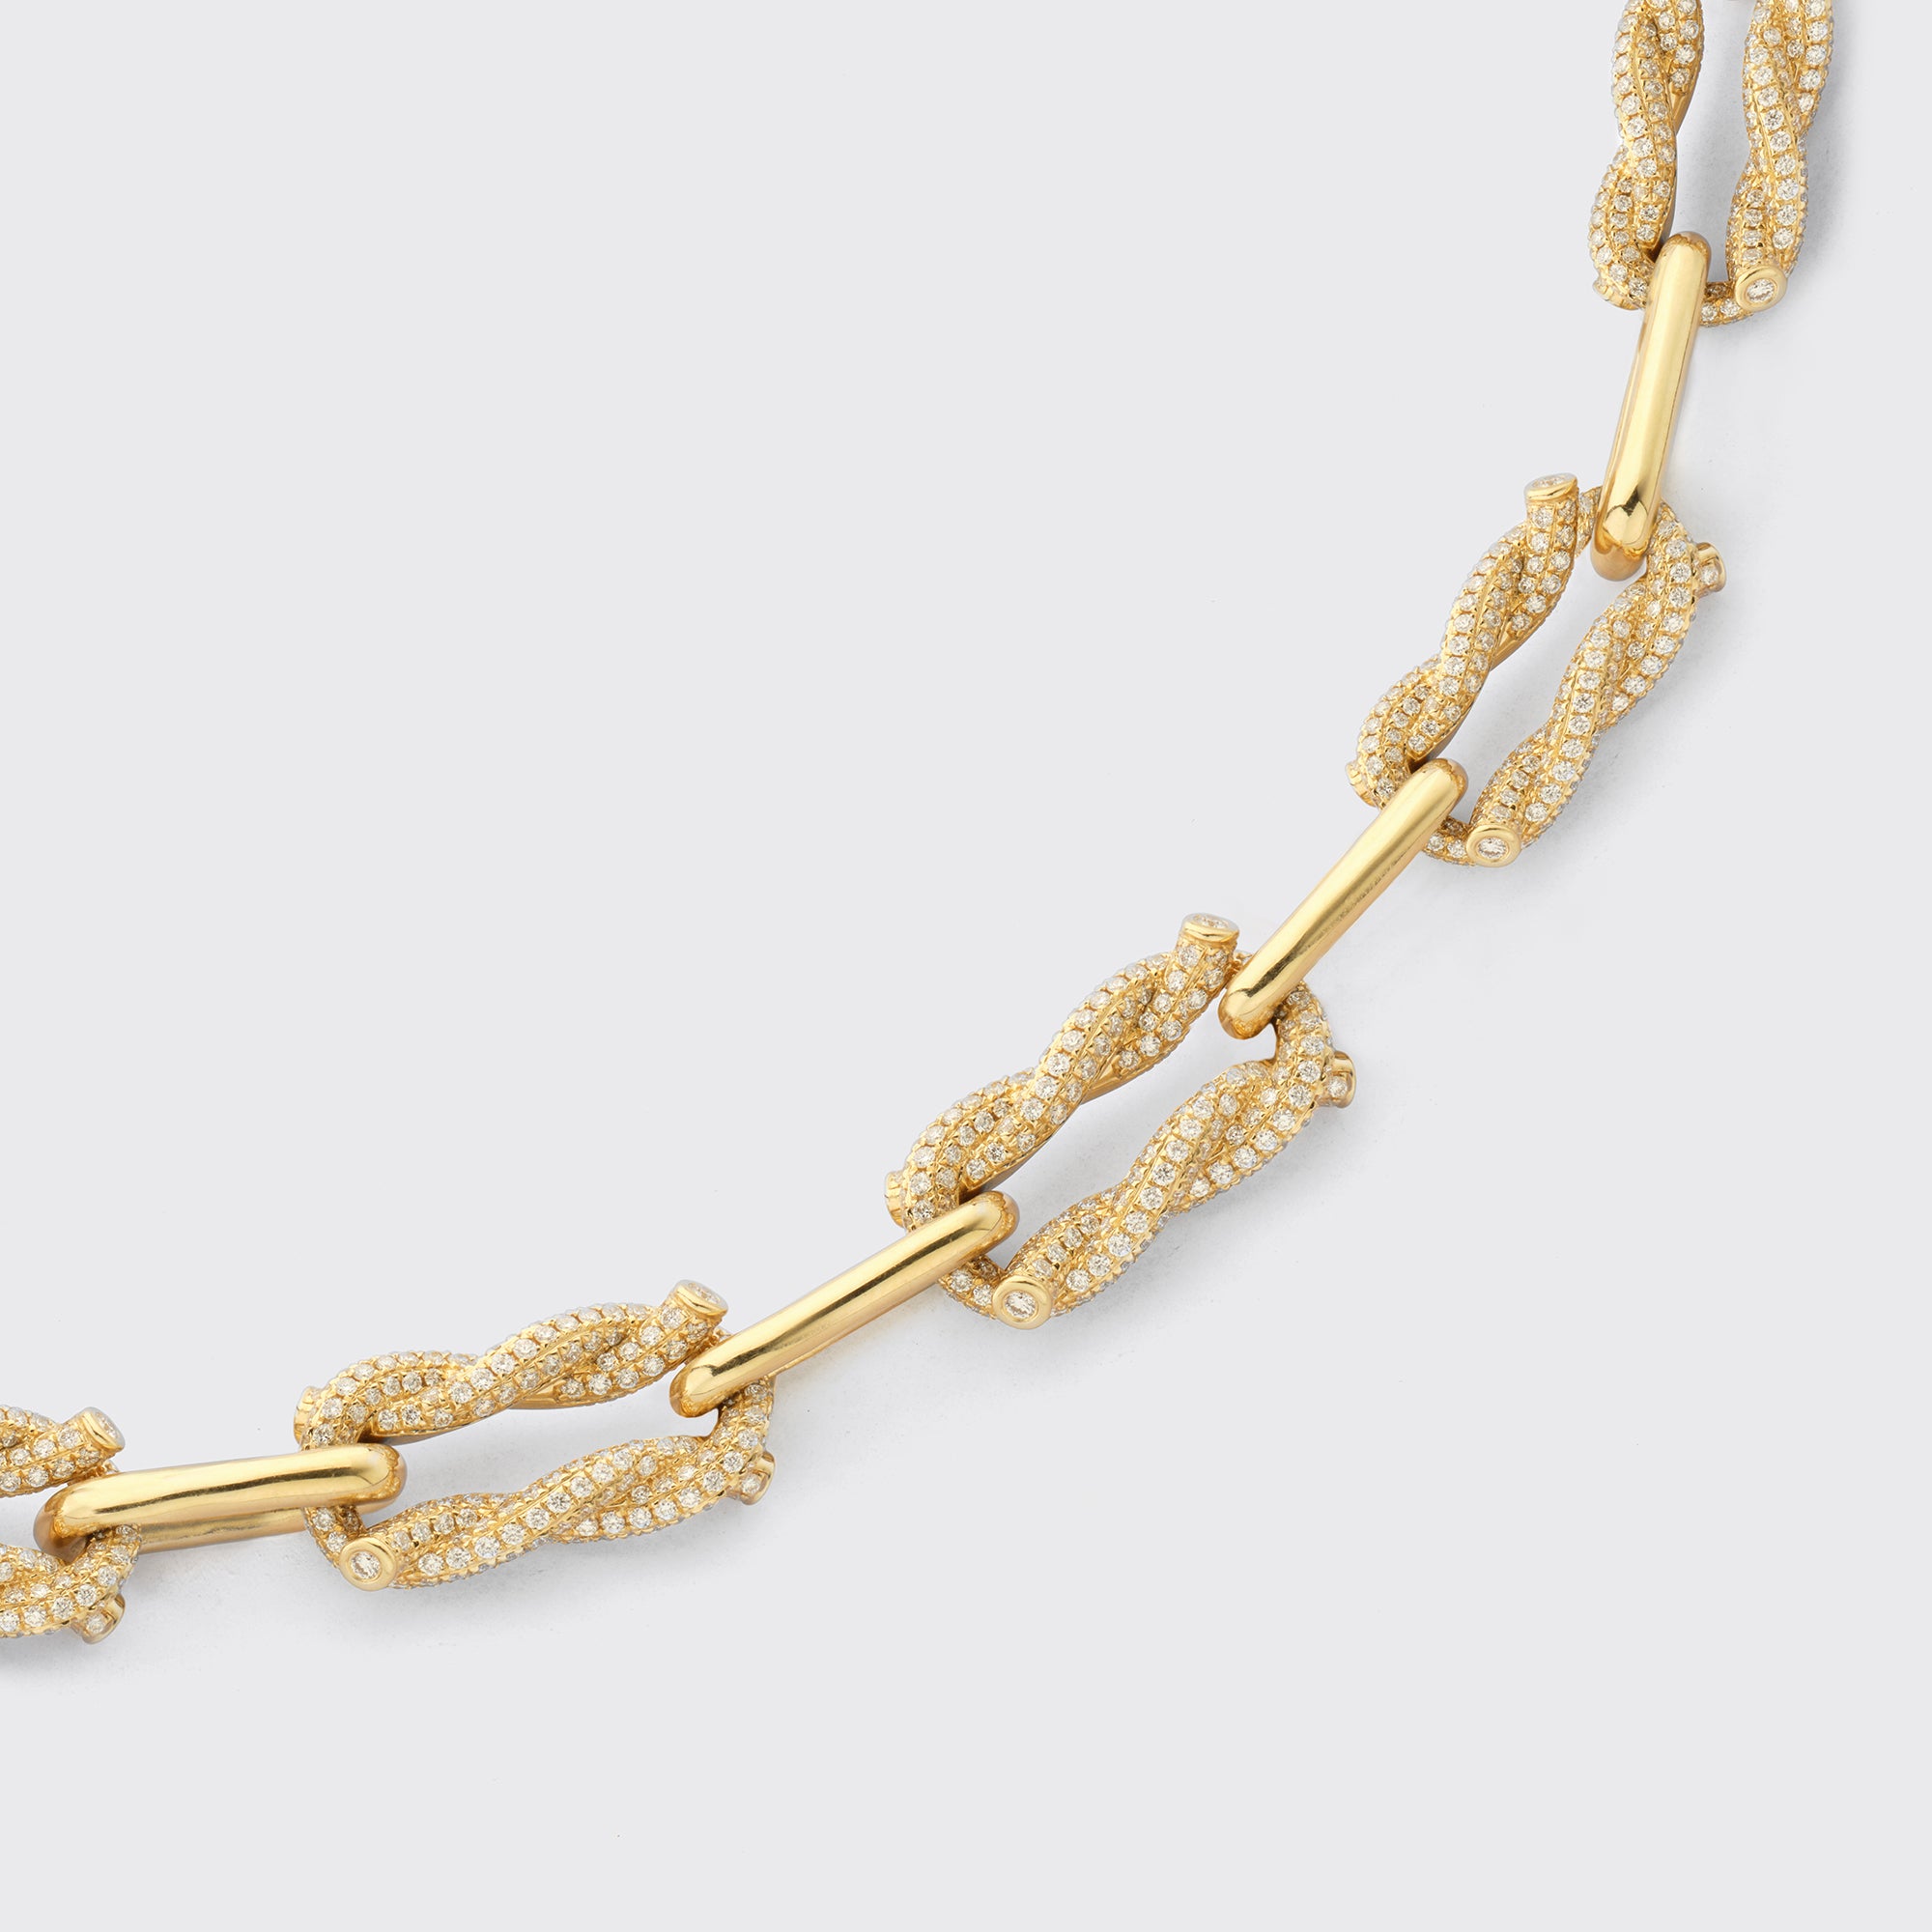 YELLOW GOLD FULL DIAMOND LARGE TIES LINKS NECKLACE